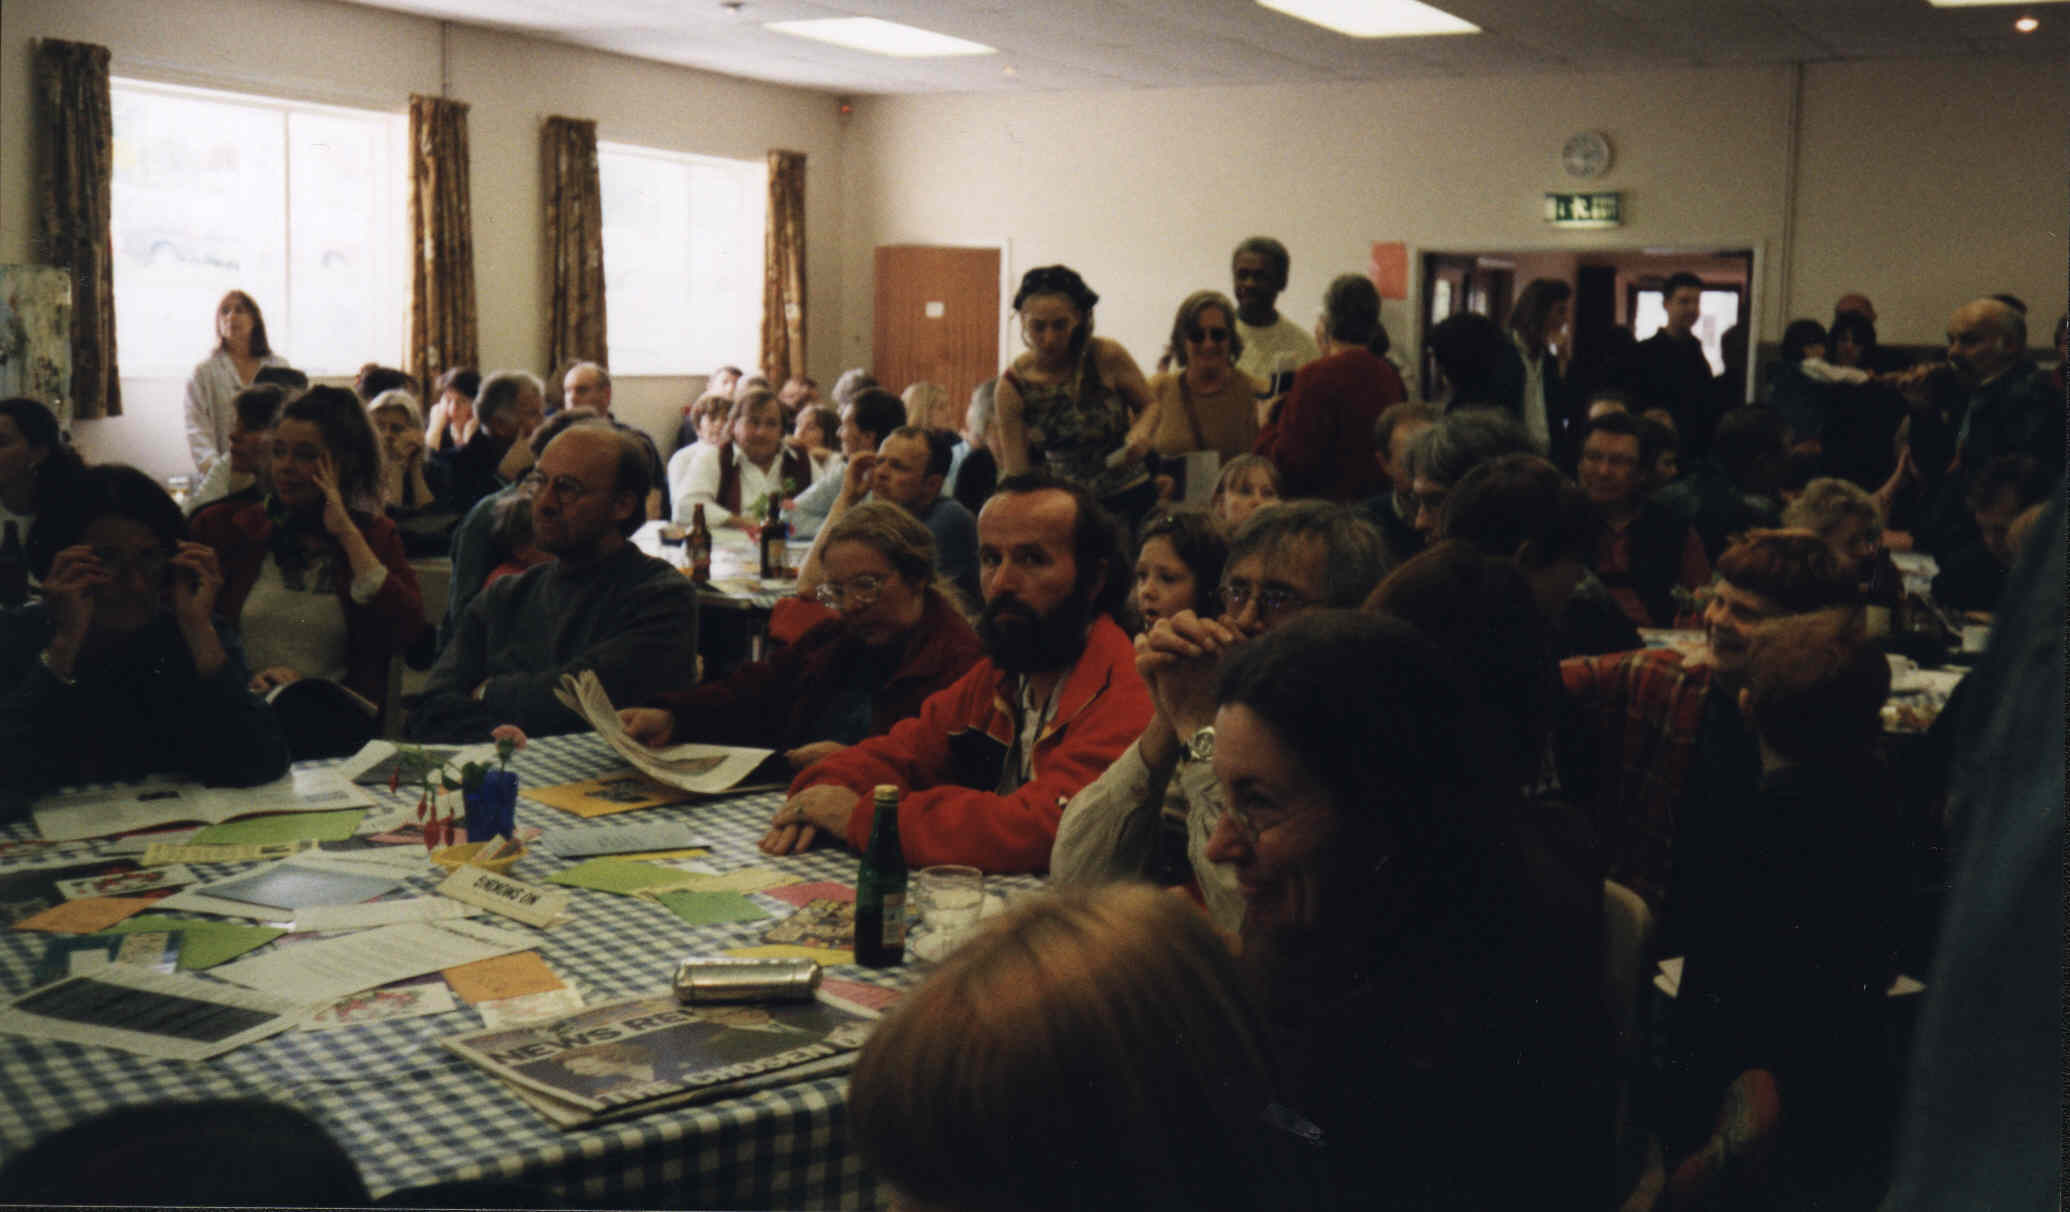 Crowd scene at the New York Funk Cafe in October 1999